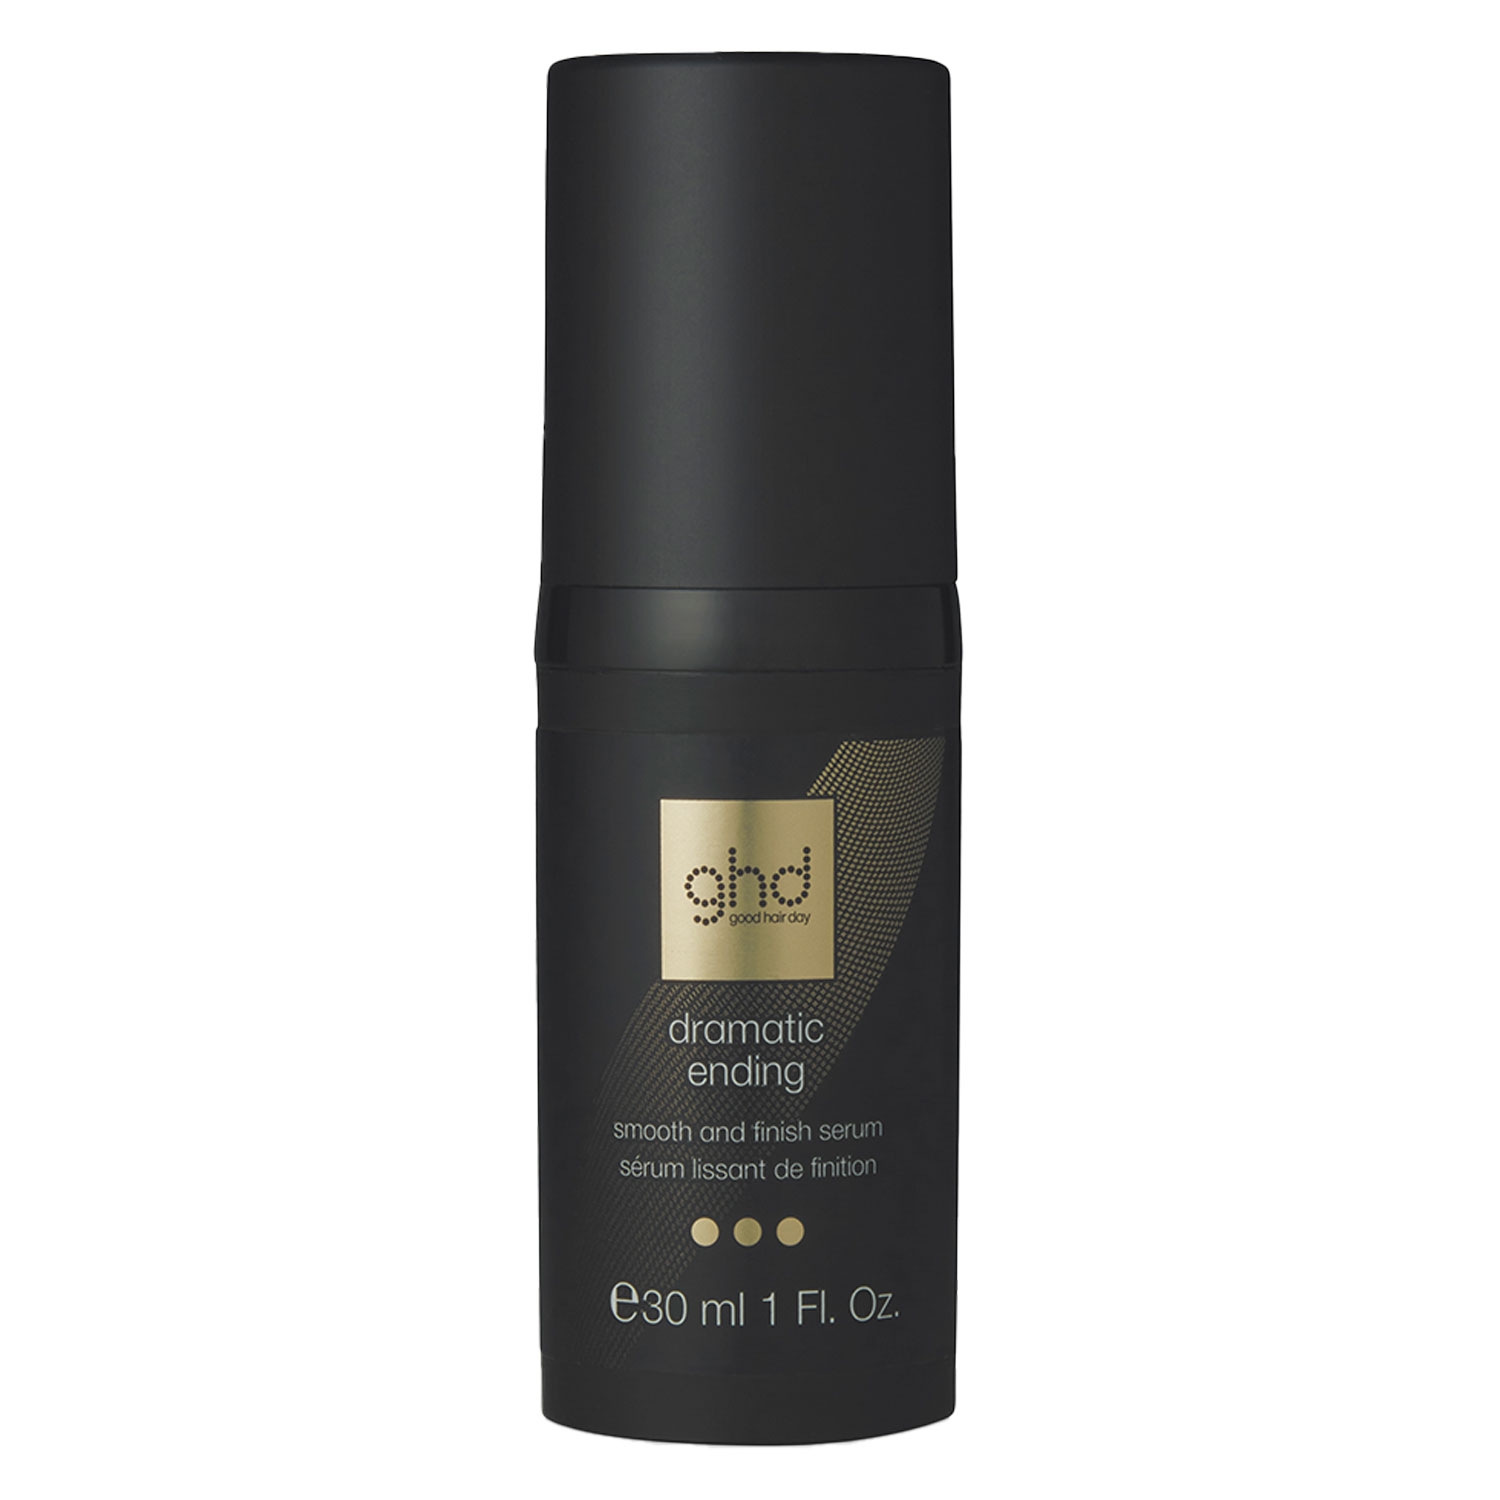 Image du produit de ghd Heat Protection Styling System - Dramatic Ending Smooth & Finish Serum